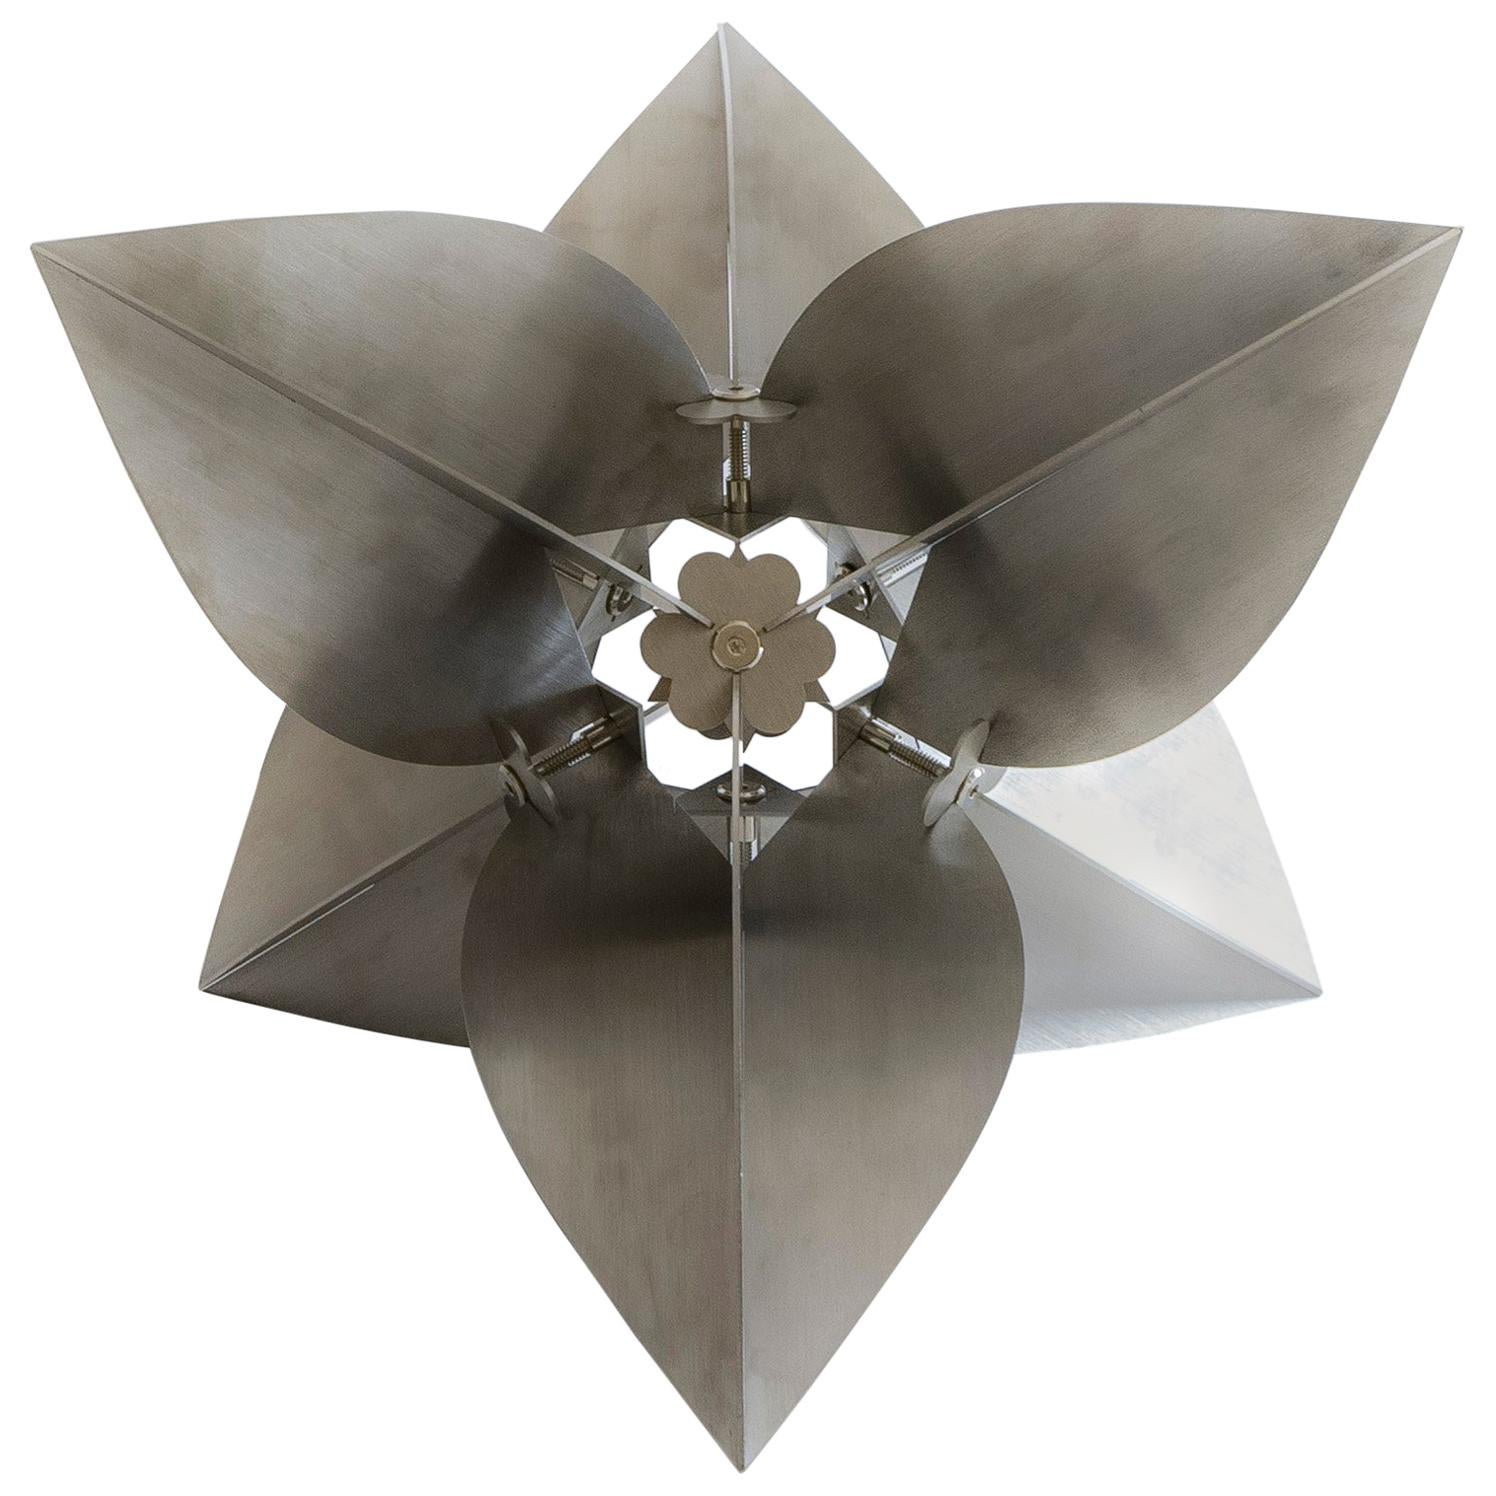 "Bugambilia" Contemporary Stainless Steel Geometric Modular Sculpture For Sale